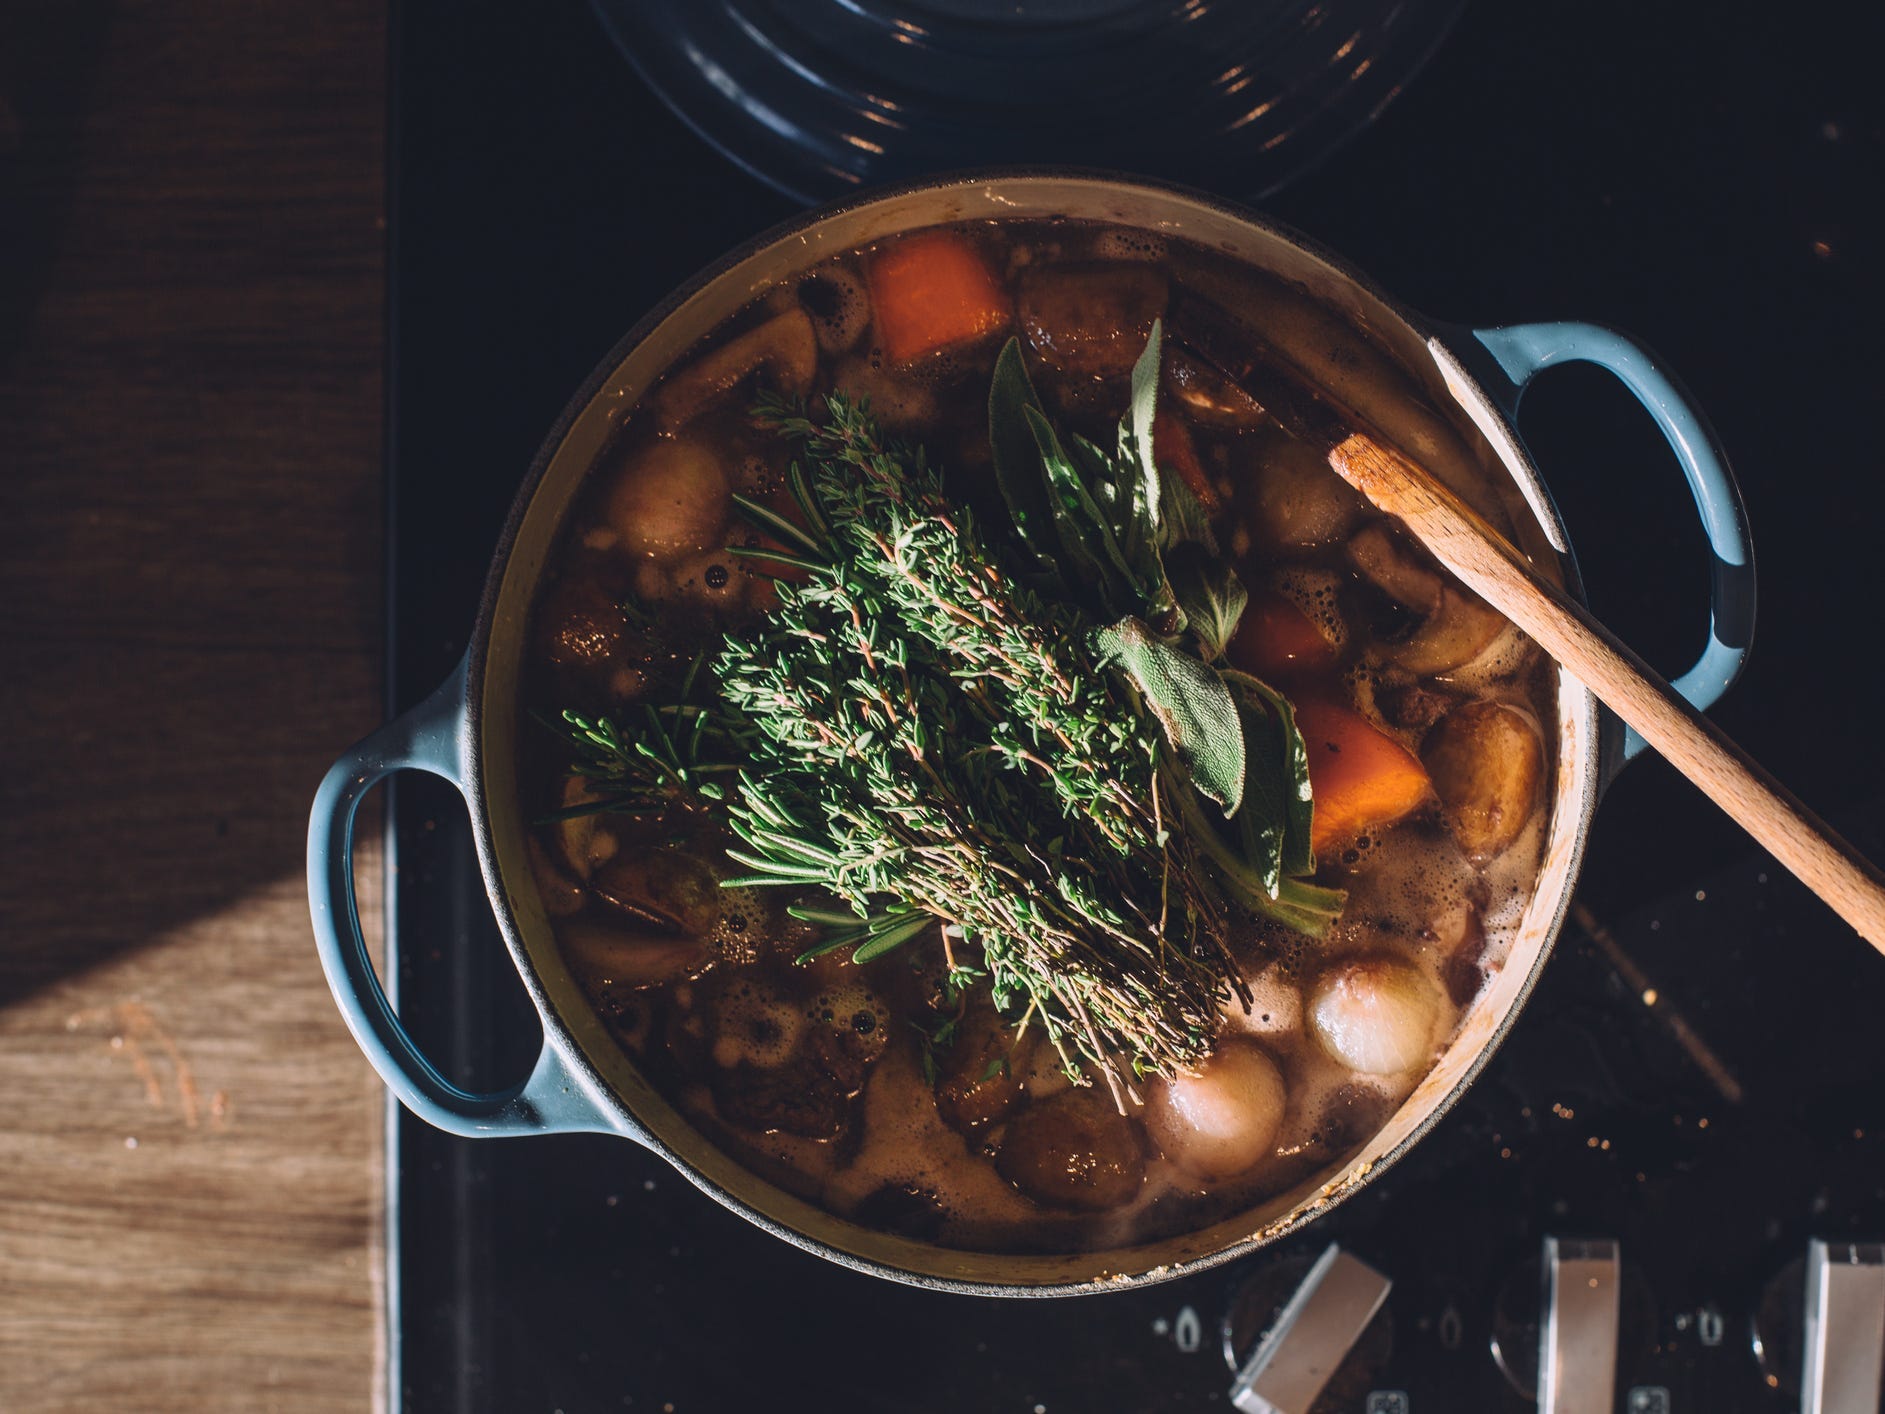 Overhead shot of stew cooking with herbs on top